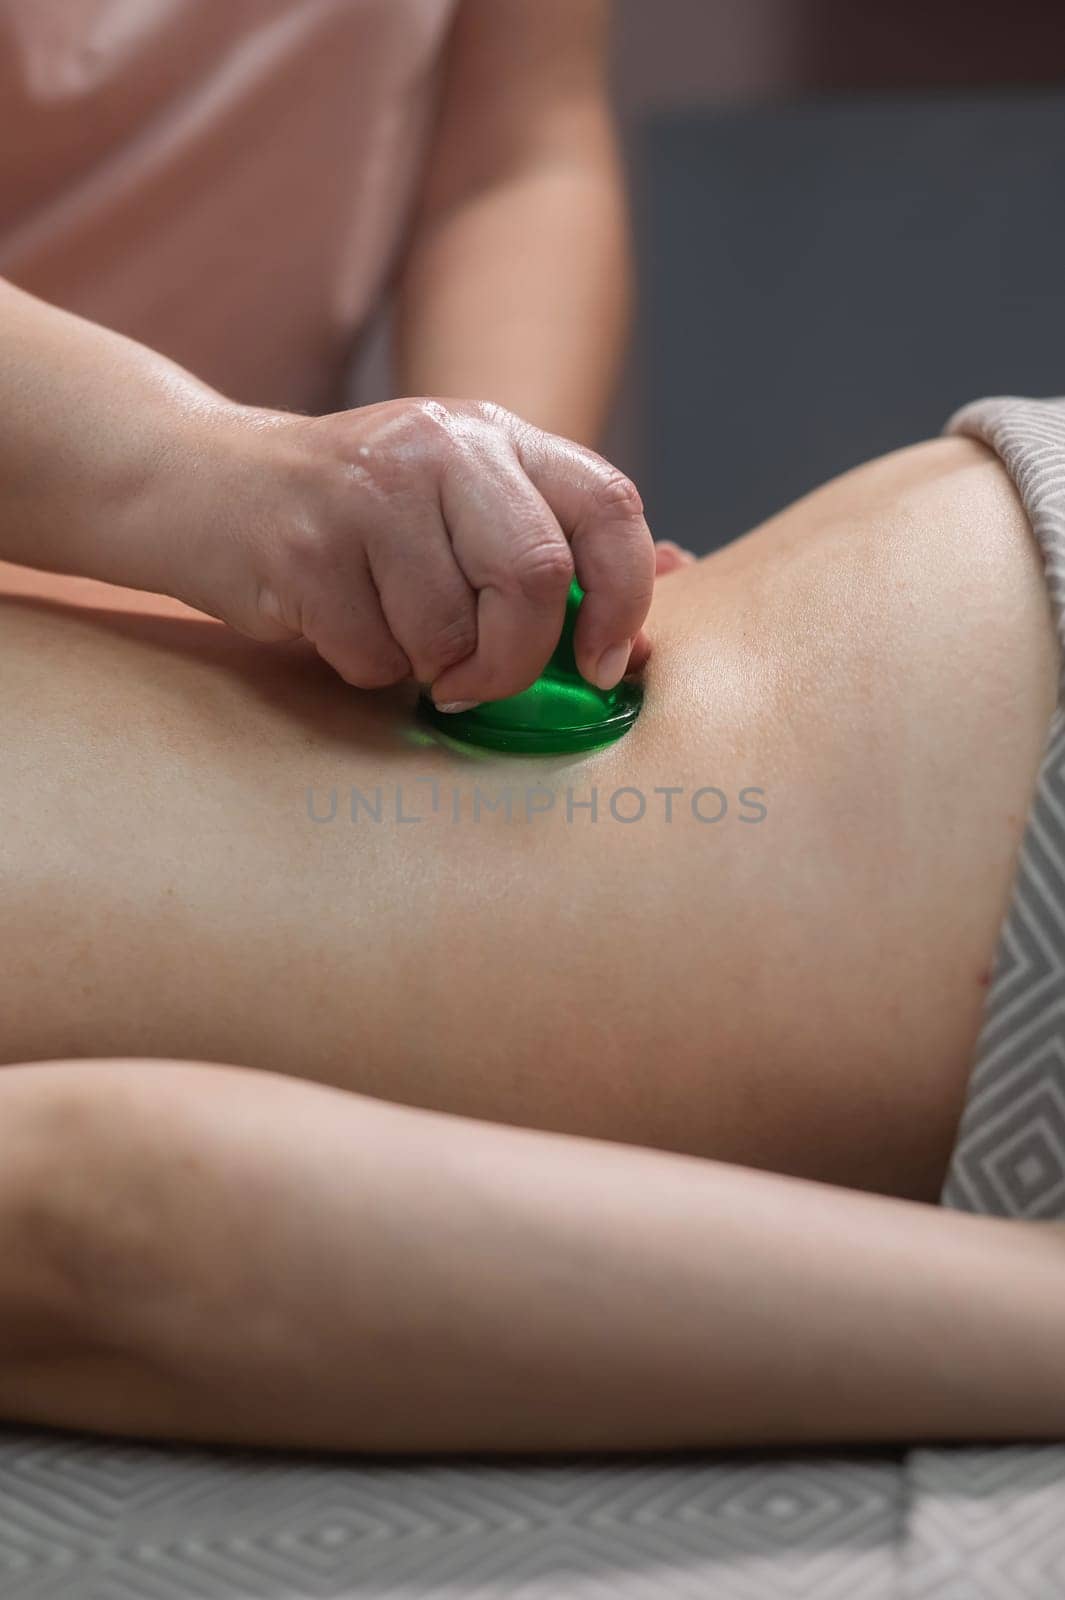 A woman undergoes an anti-cellulite massage procedure using a vacuum jar. Close-up of the lower back. Vertical photo